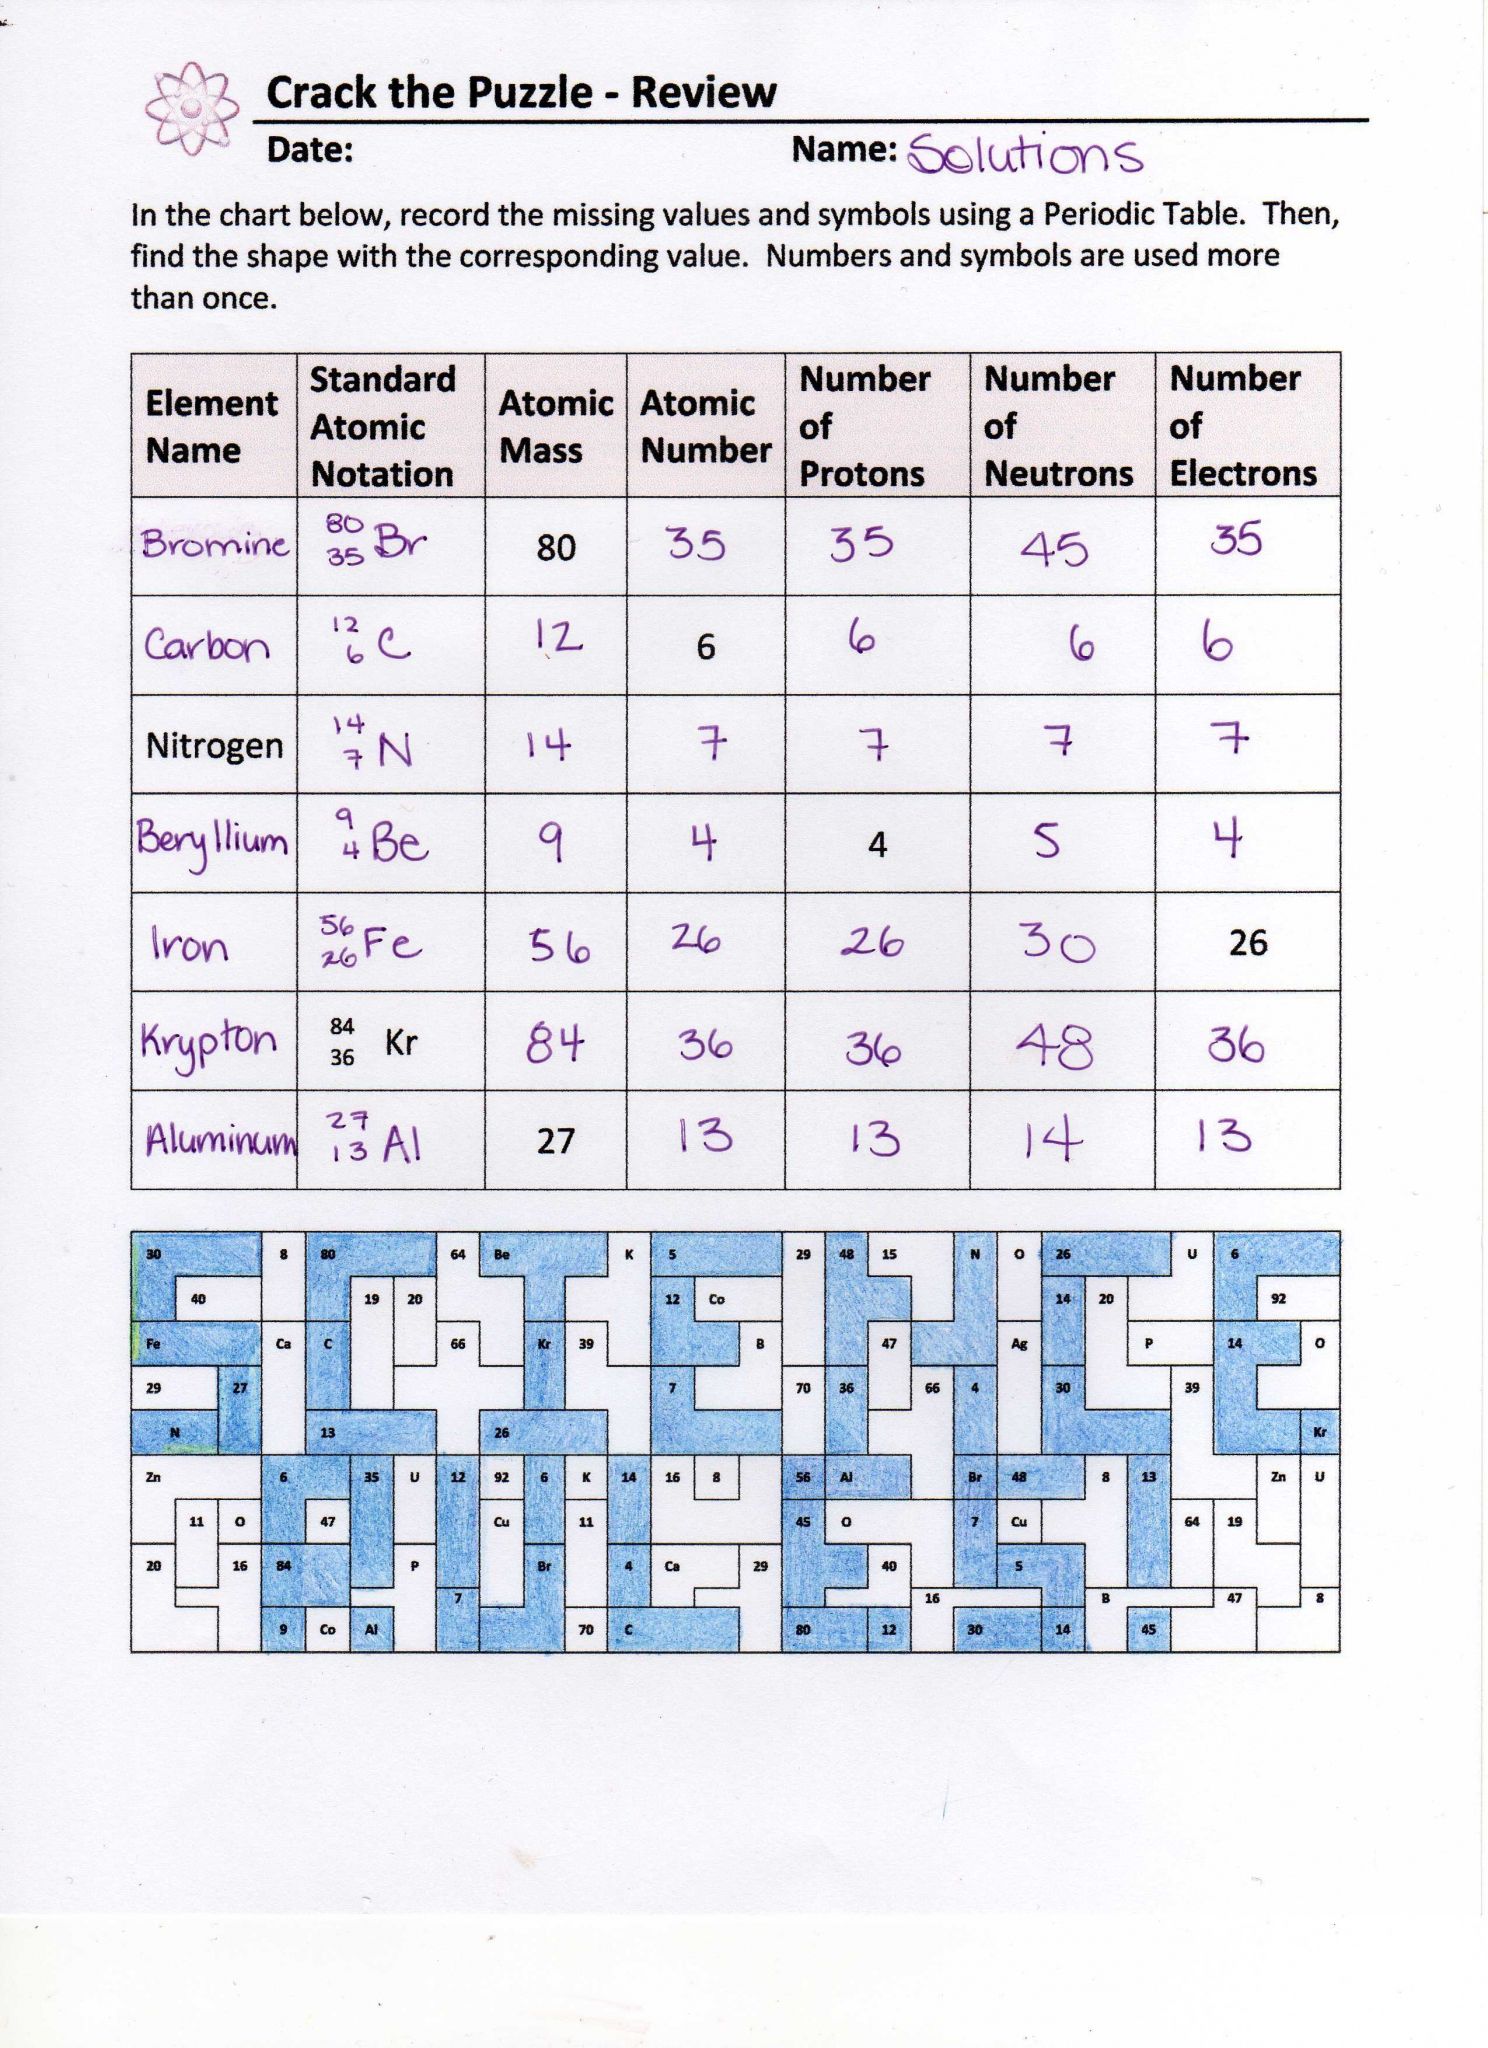 Periodic Table Puzzle Worksheet Answers Along with Tabla Peridica Del Vino Periodic Table Of Wine How the Table Works